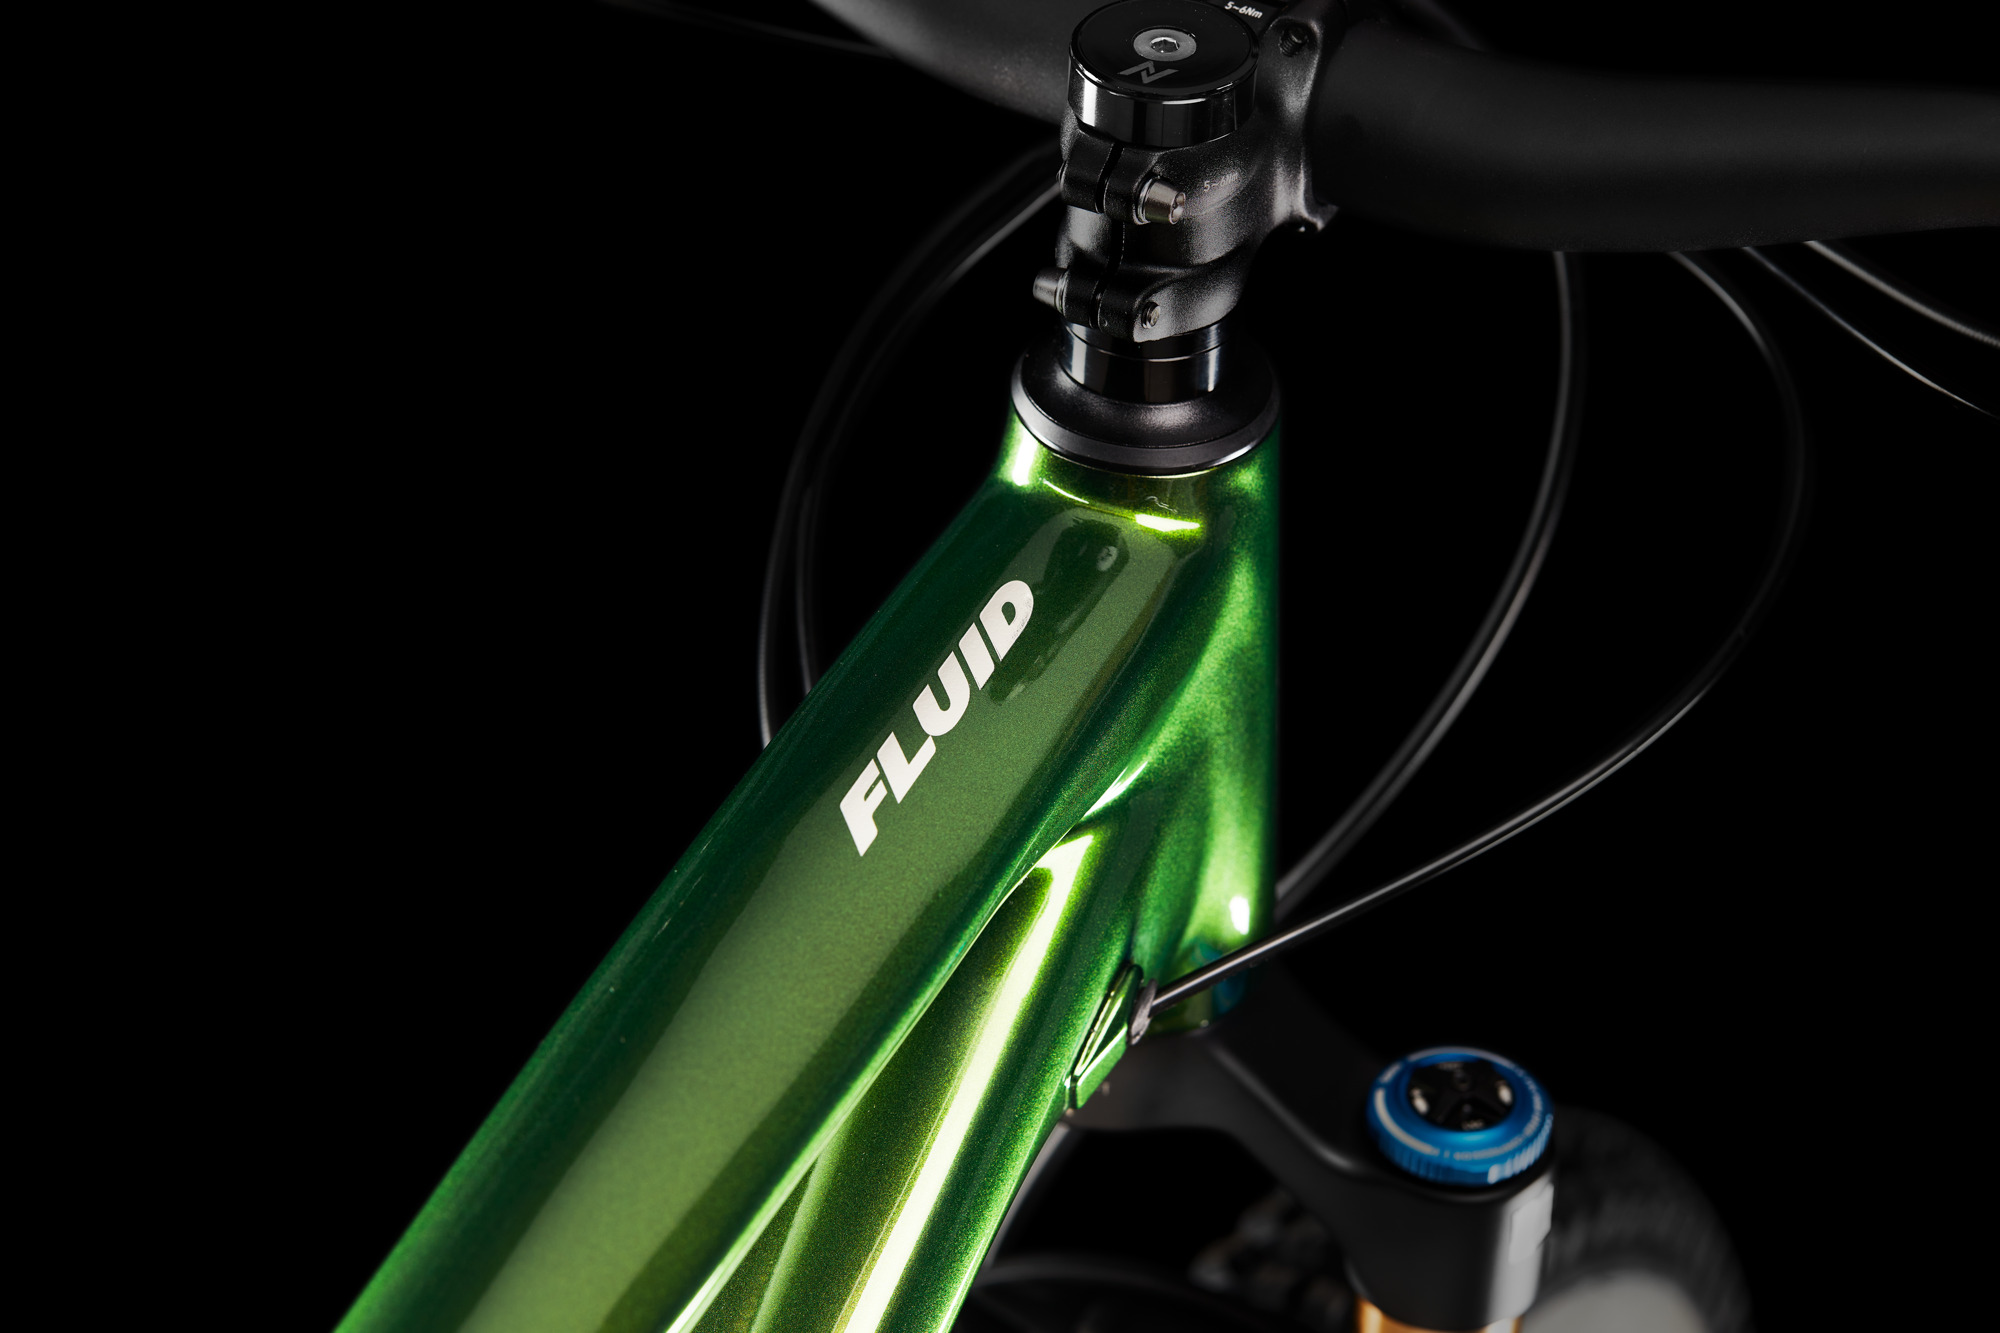 David Golay reviews the Norco Fluid FS for Blister